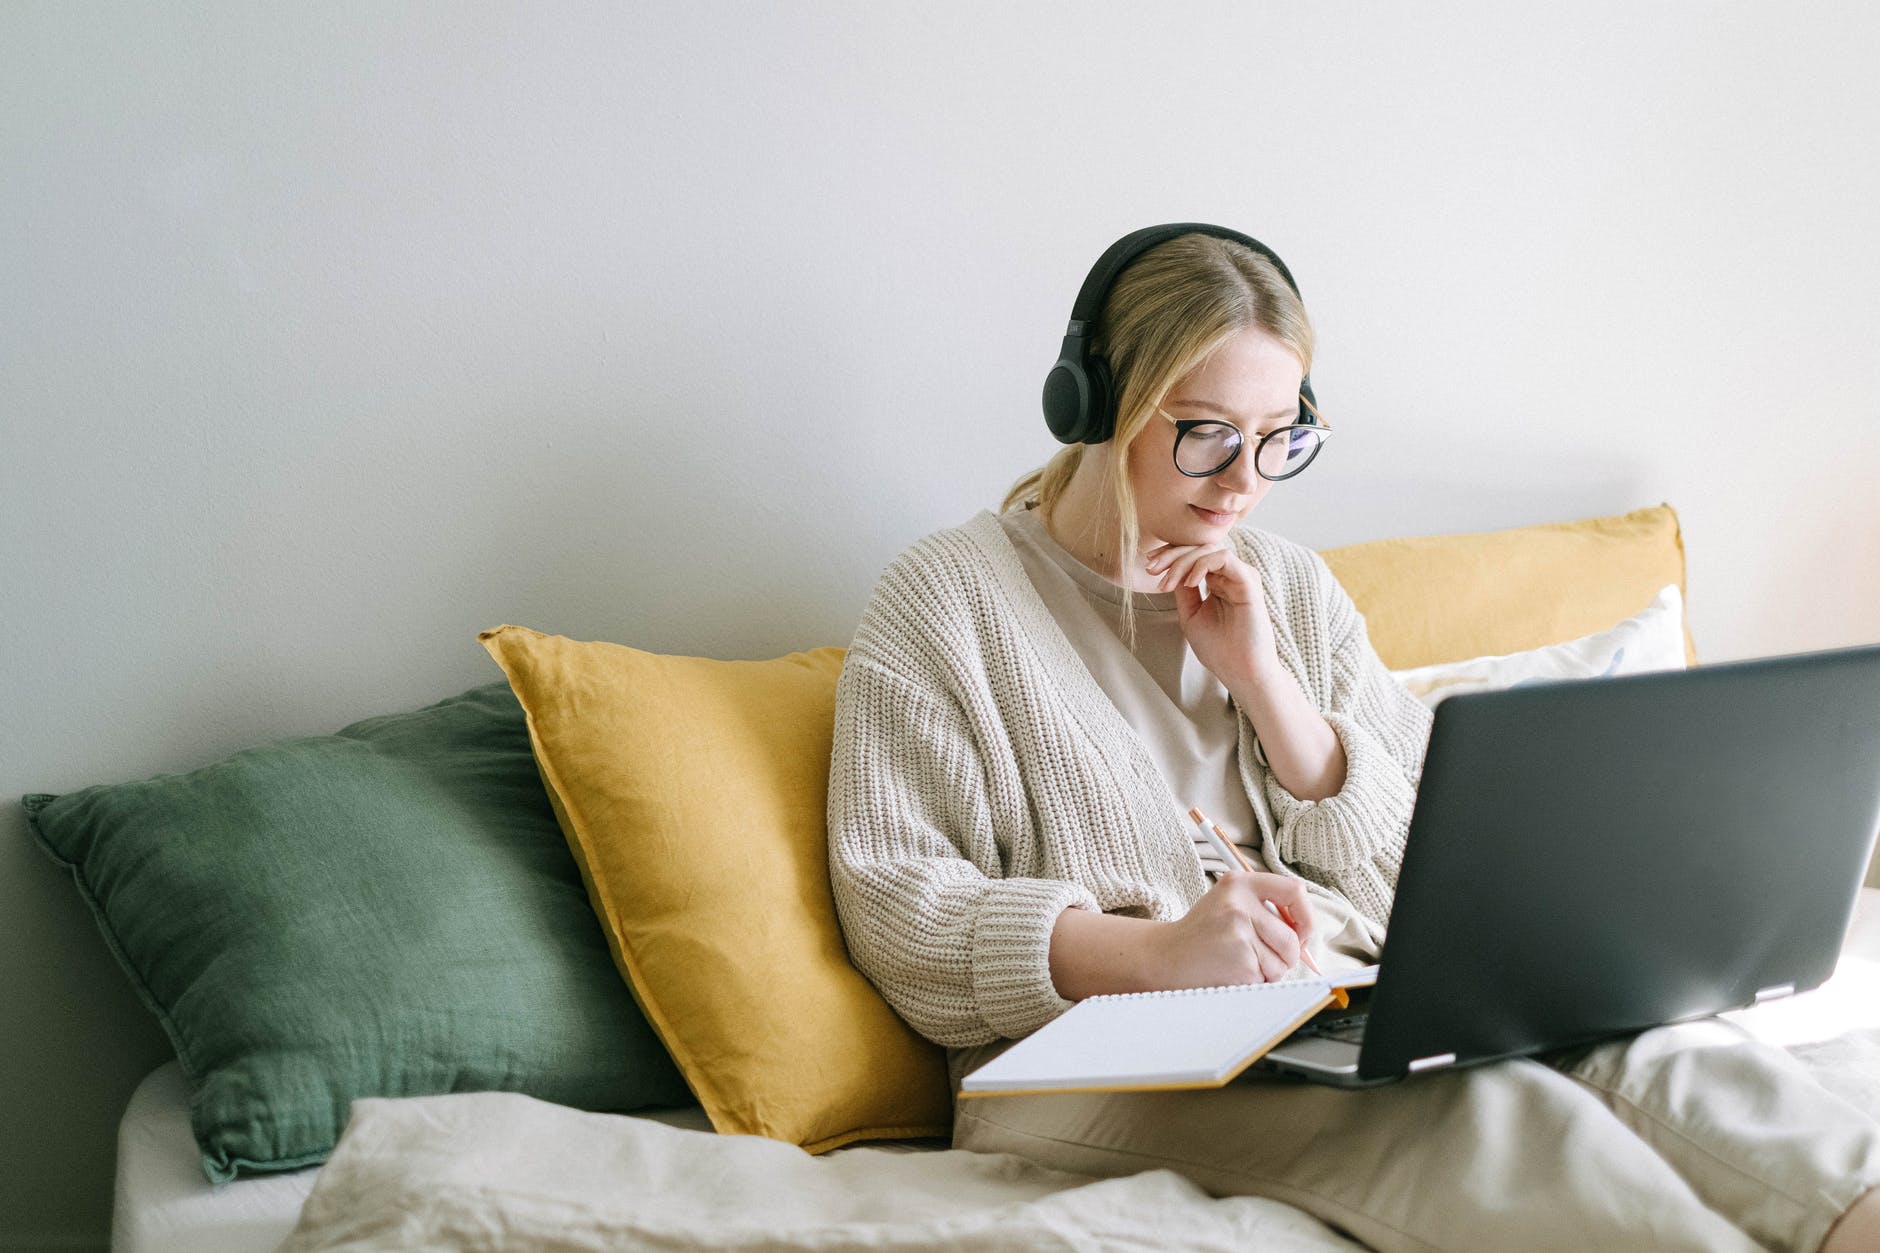 4 Top Things That Helped Me Work From Home This Year